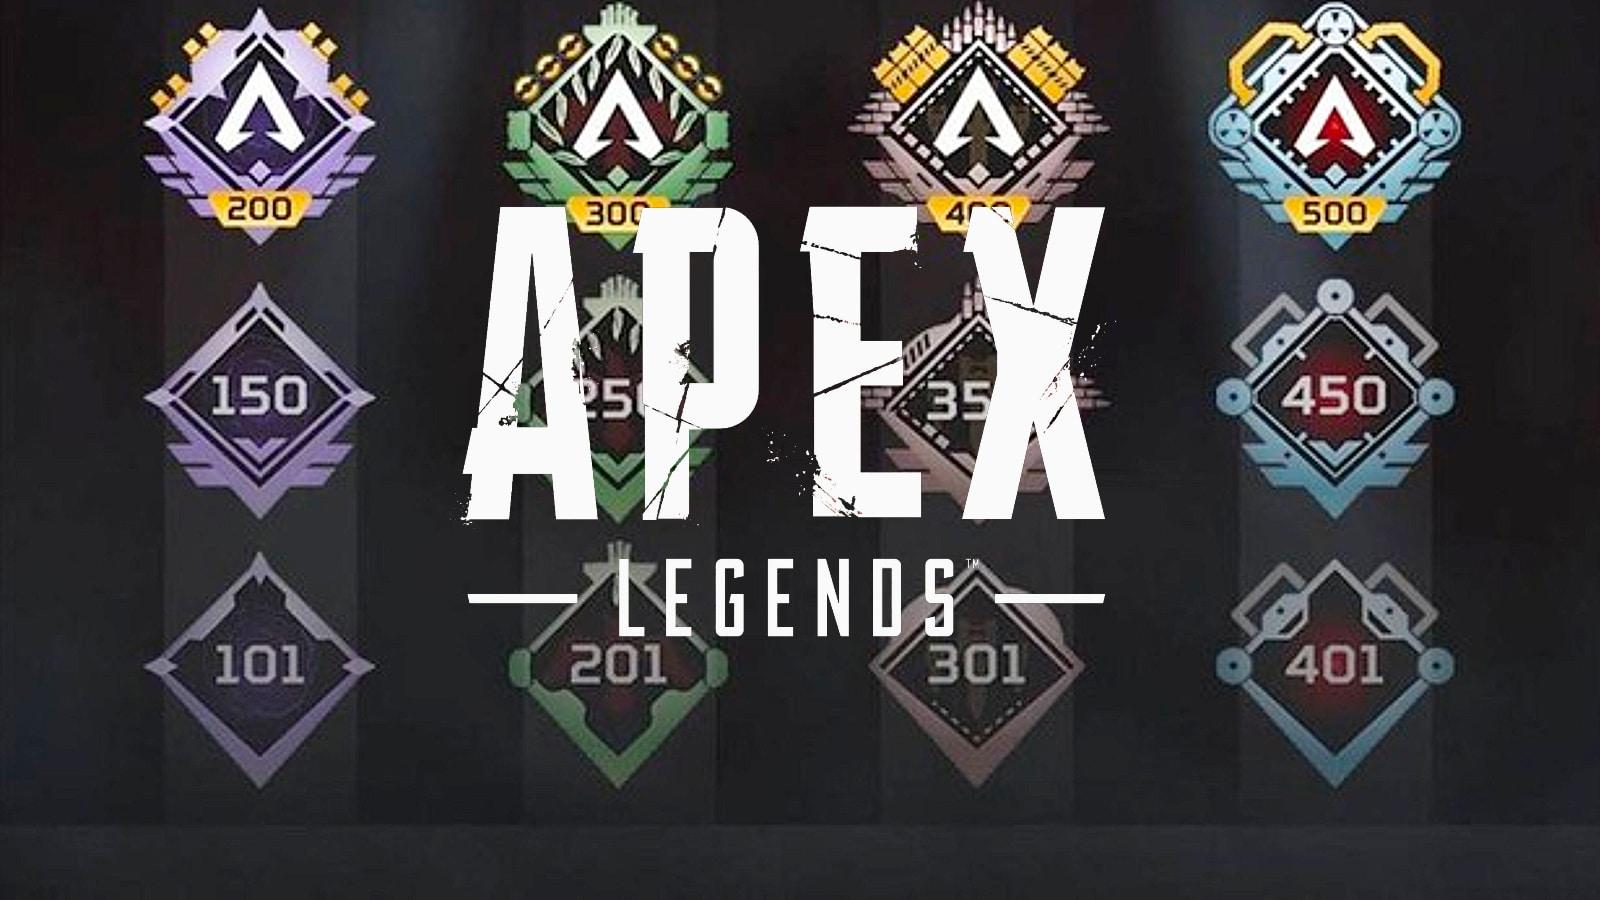 Apex Legends player sets record as first to reach new level cap of 2000